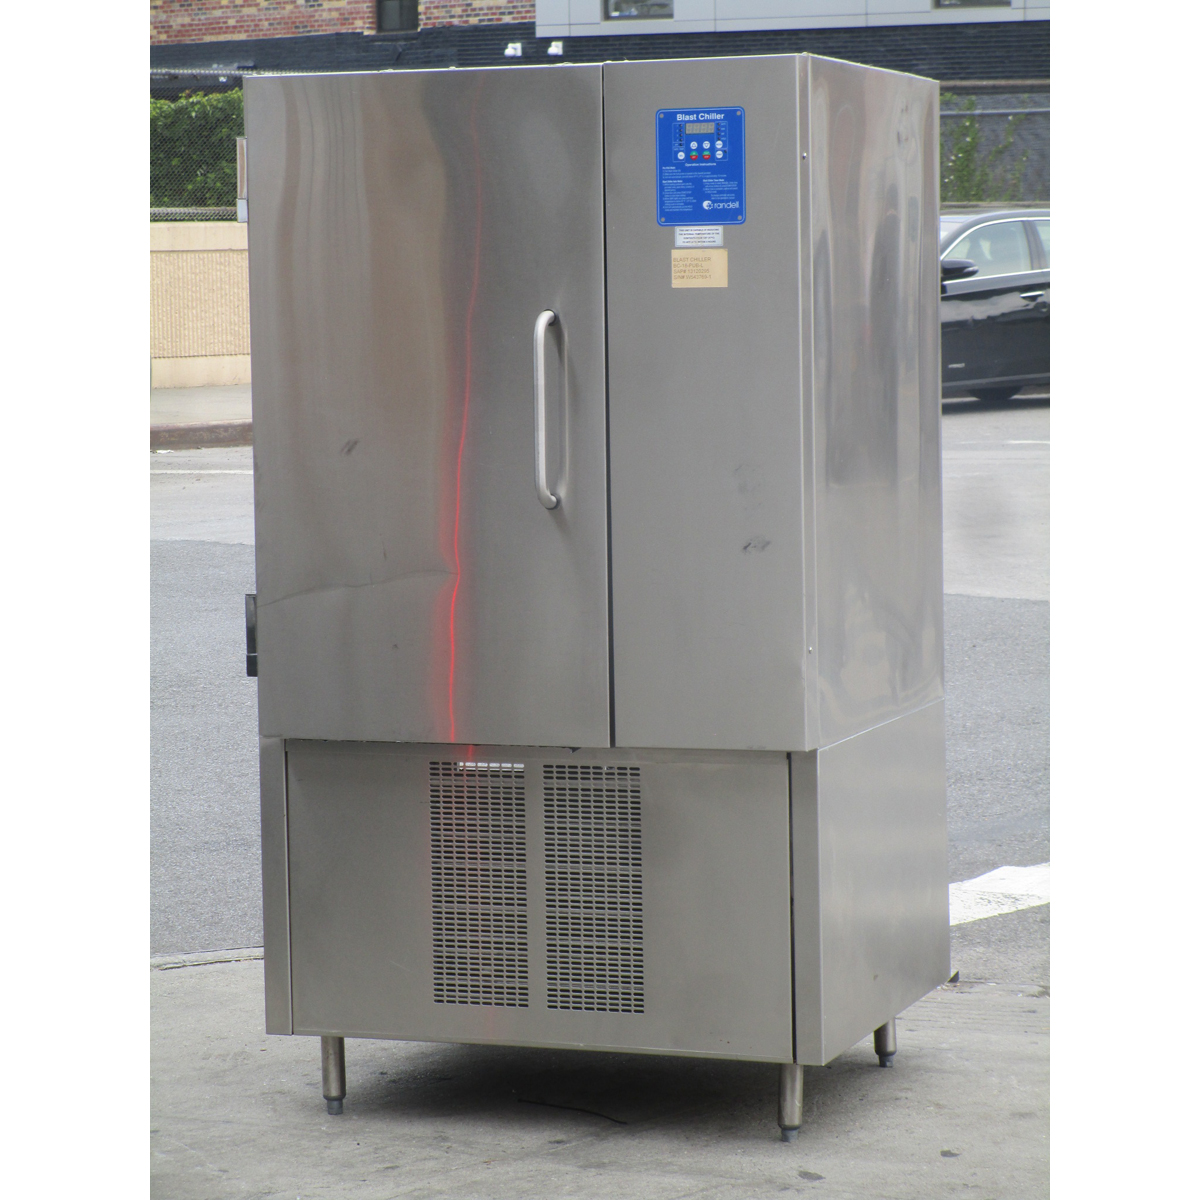 Randell BC-18 Blast Chiller, Used Very Good Condition